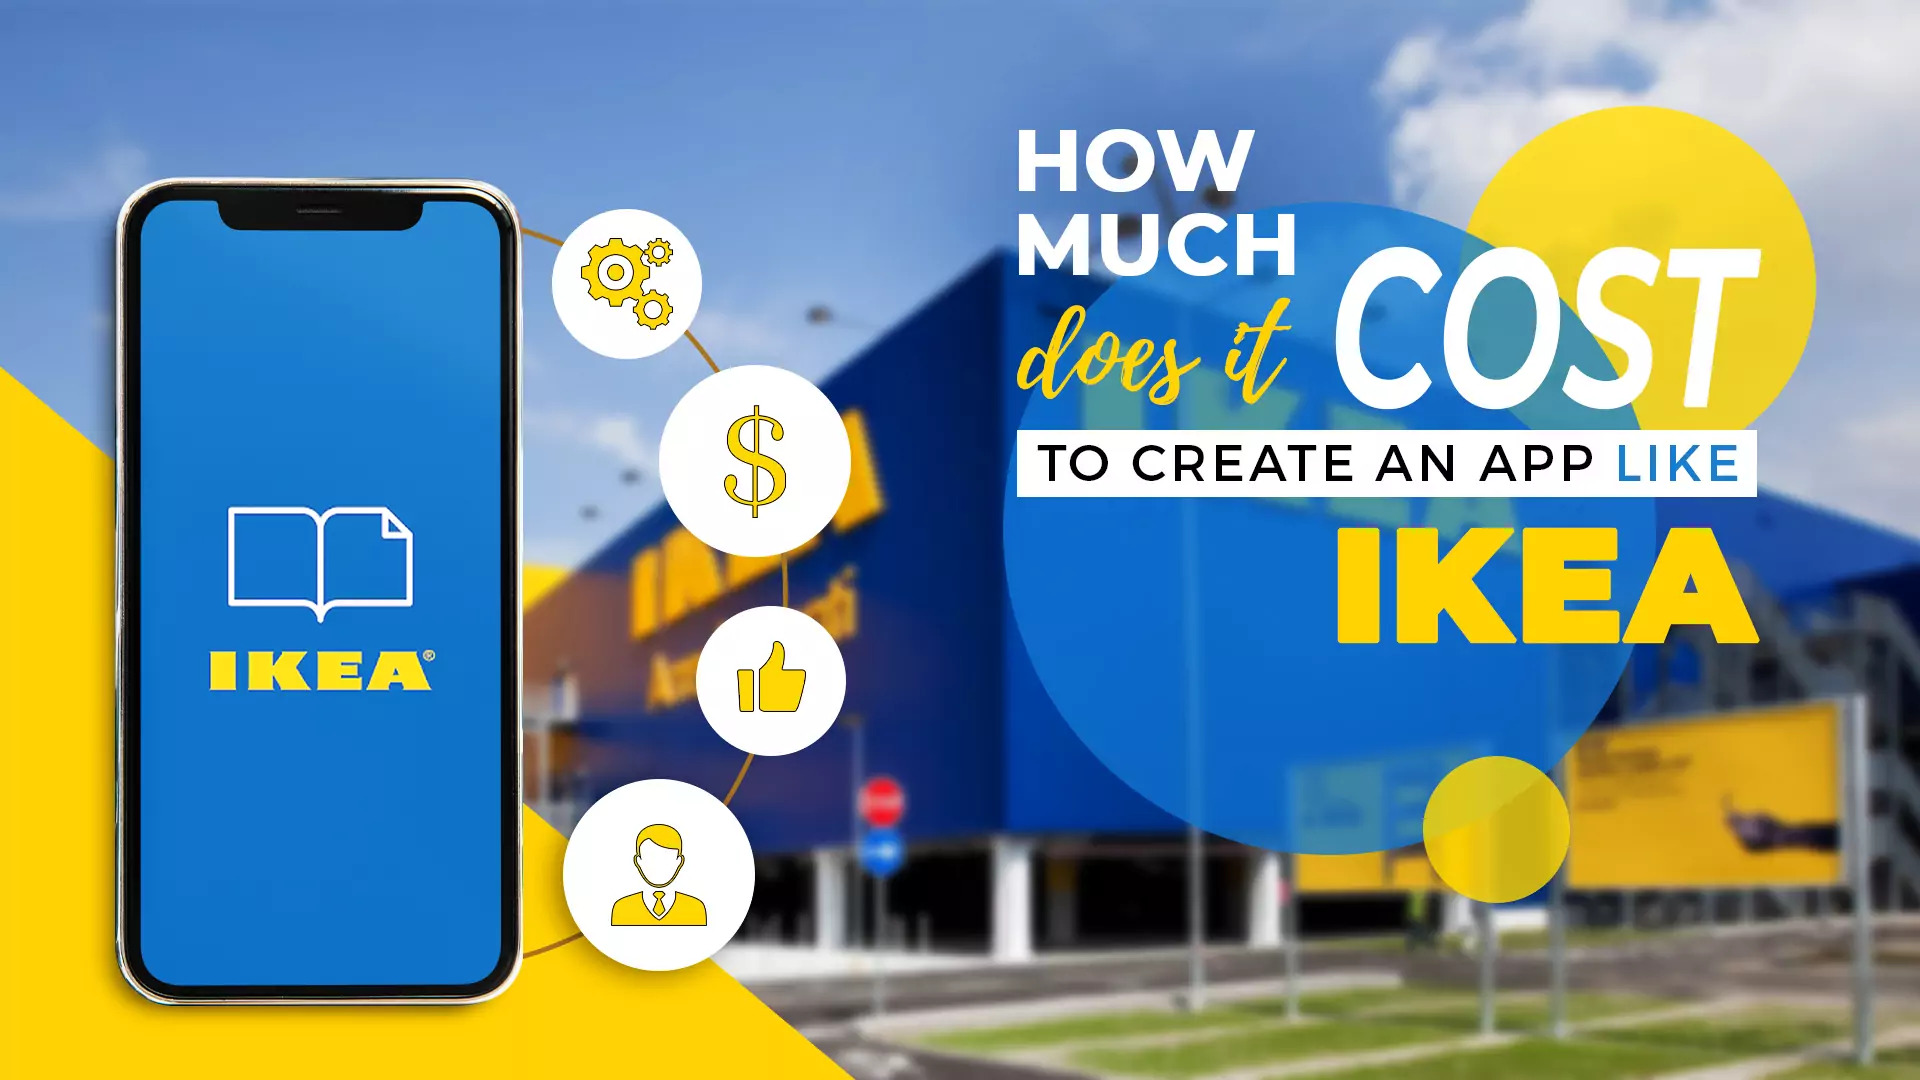 How much does it cost to create an app like IKEA